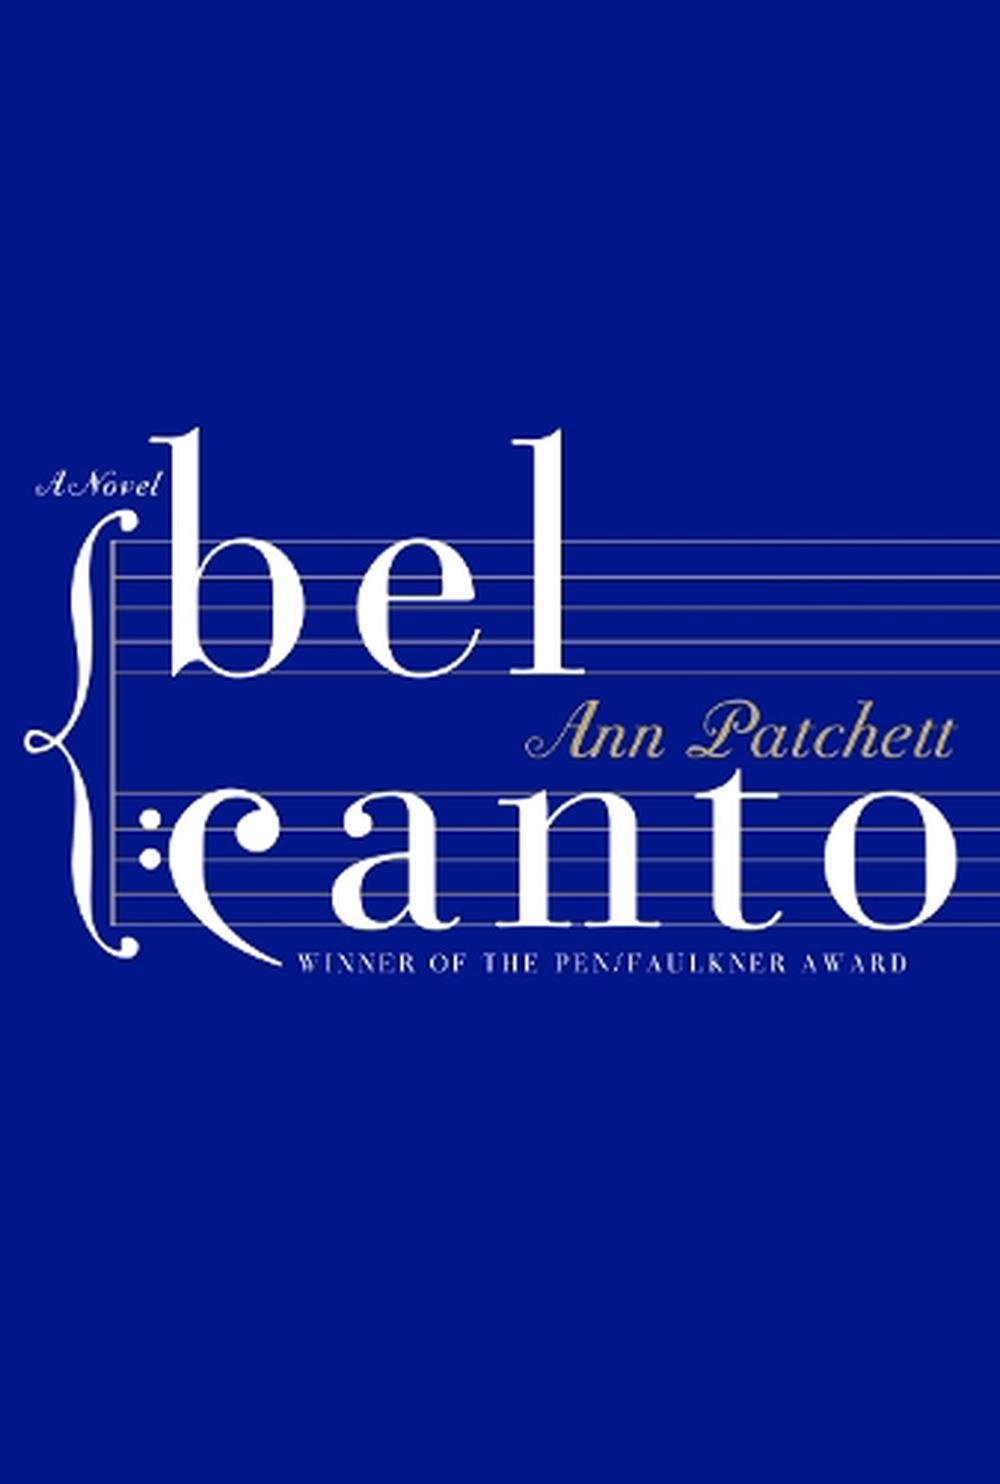 bel canto review book